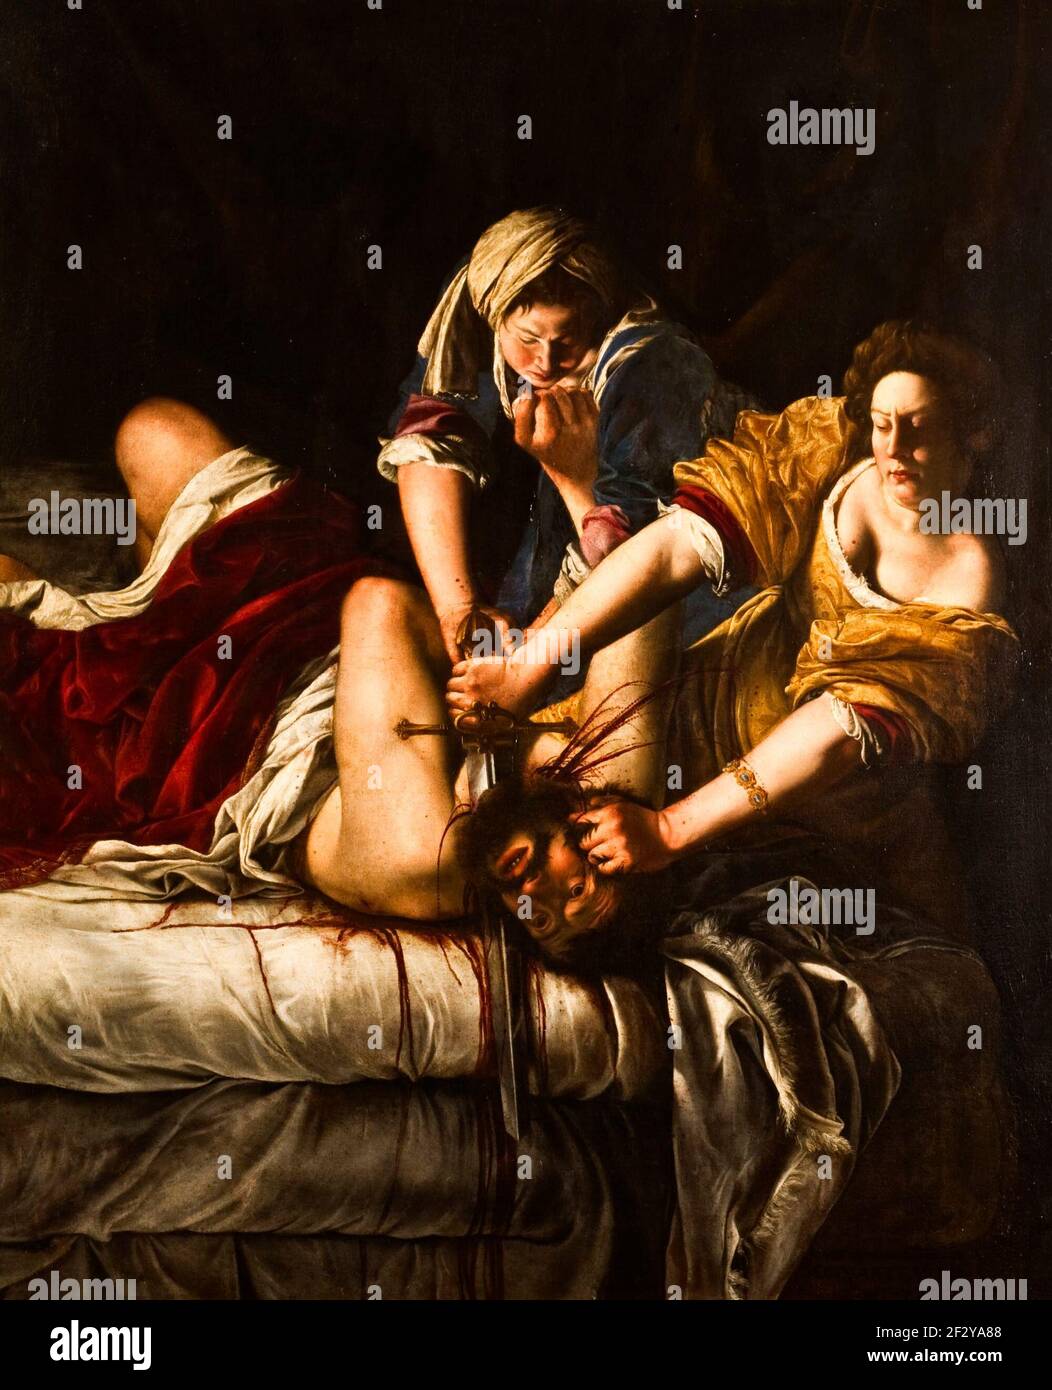 Judith Beheading Holofernes - Artemisia Gentileschi, circa 1620 - Two women pin down a man on a bed. With one hand, Judith holds his head; with the other, she slices his throat with a long sword. The intensity of the scene is highlighted by the dripping blood soaking the white bed sheets and the man's eyes wide open — conscious, but helpless. Artemisia is more a champion of strong women rather than a woman obsessed with violence and revenge. Stock Photo